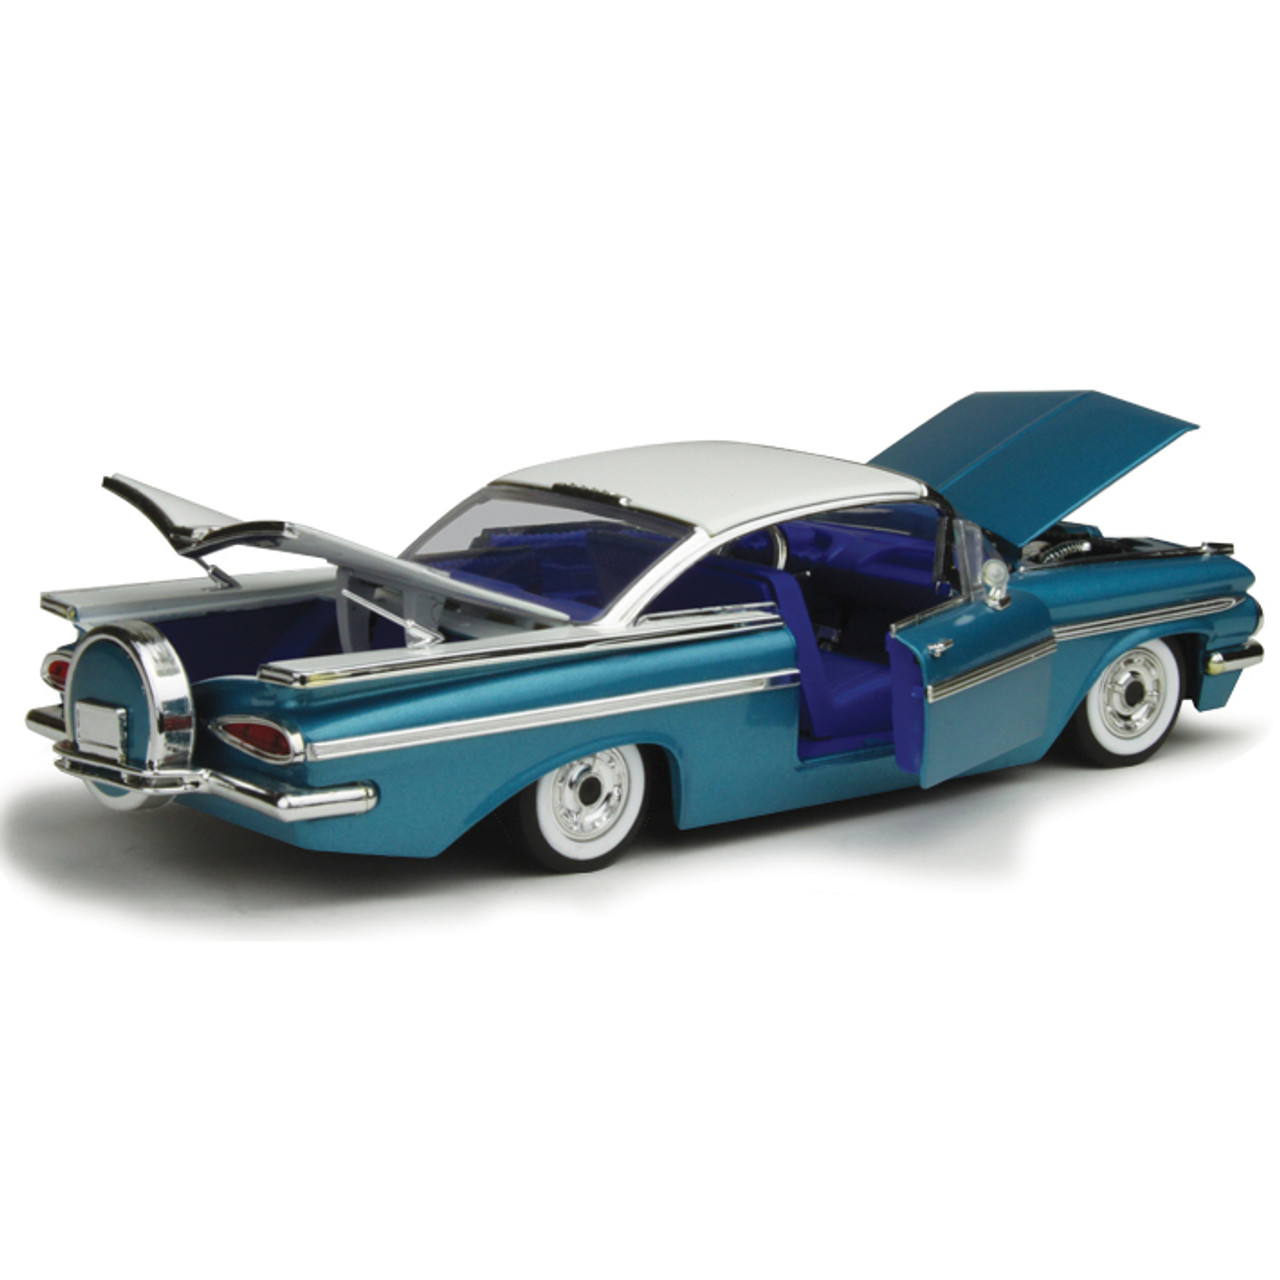 1959 Chevy Impala Hard Top 1:24 Scale Diecast Model by Jada Toys